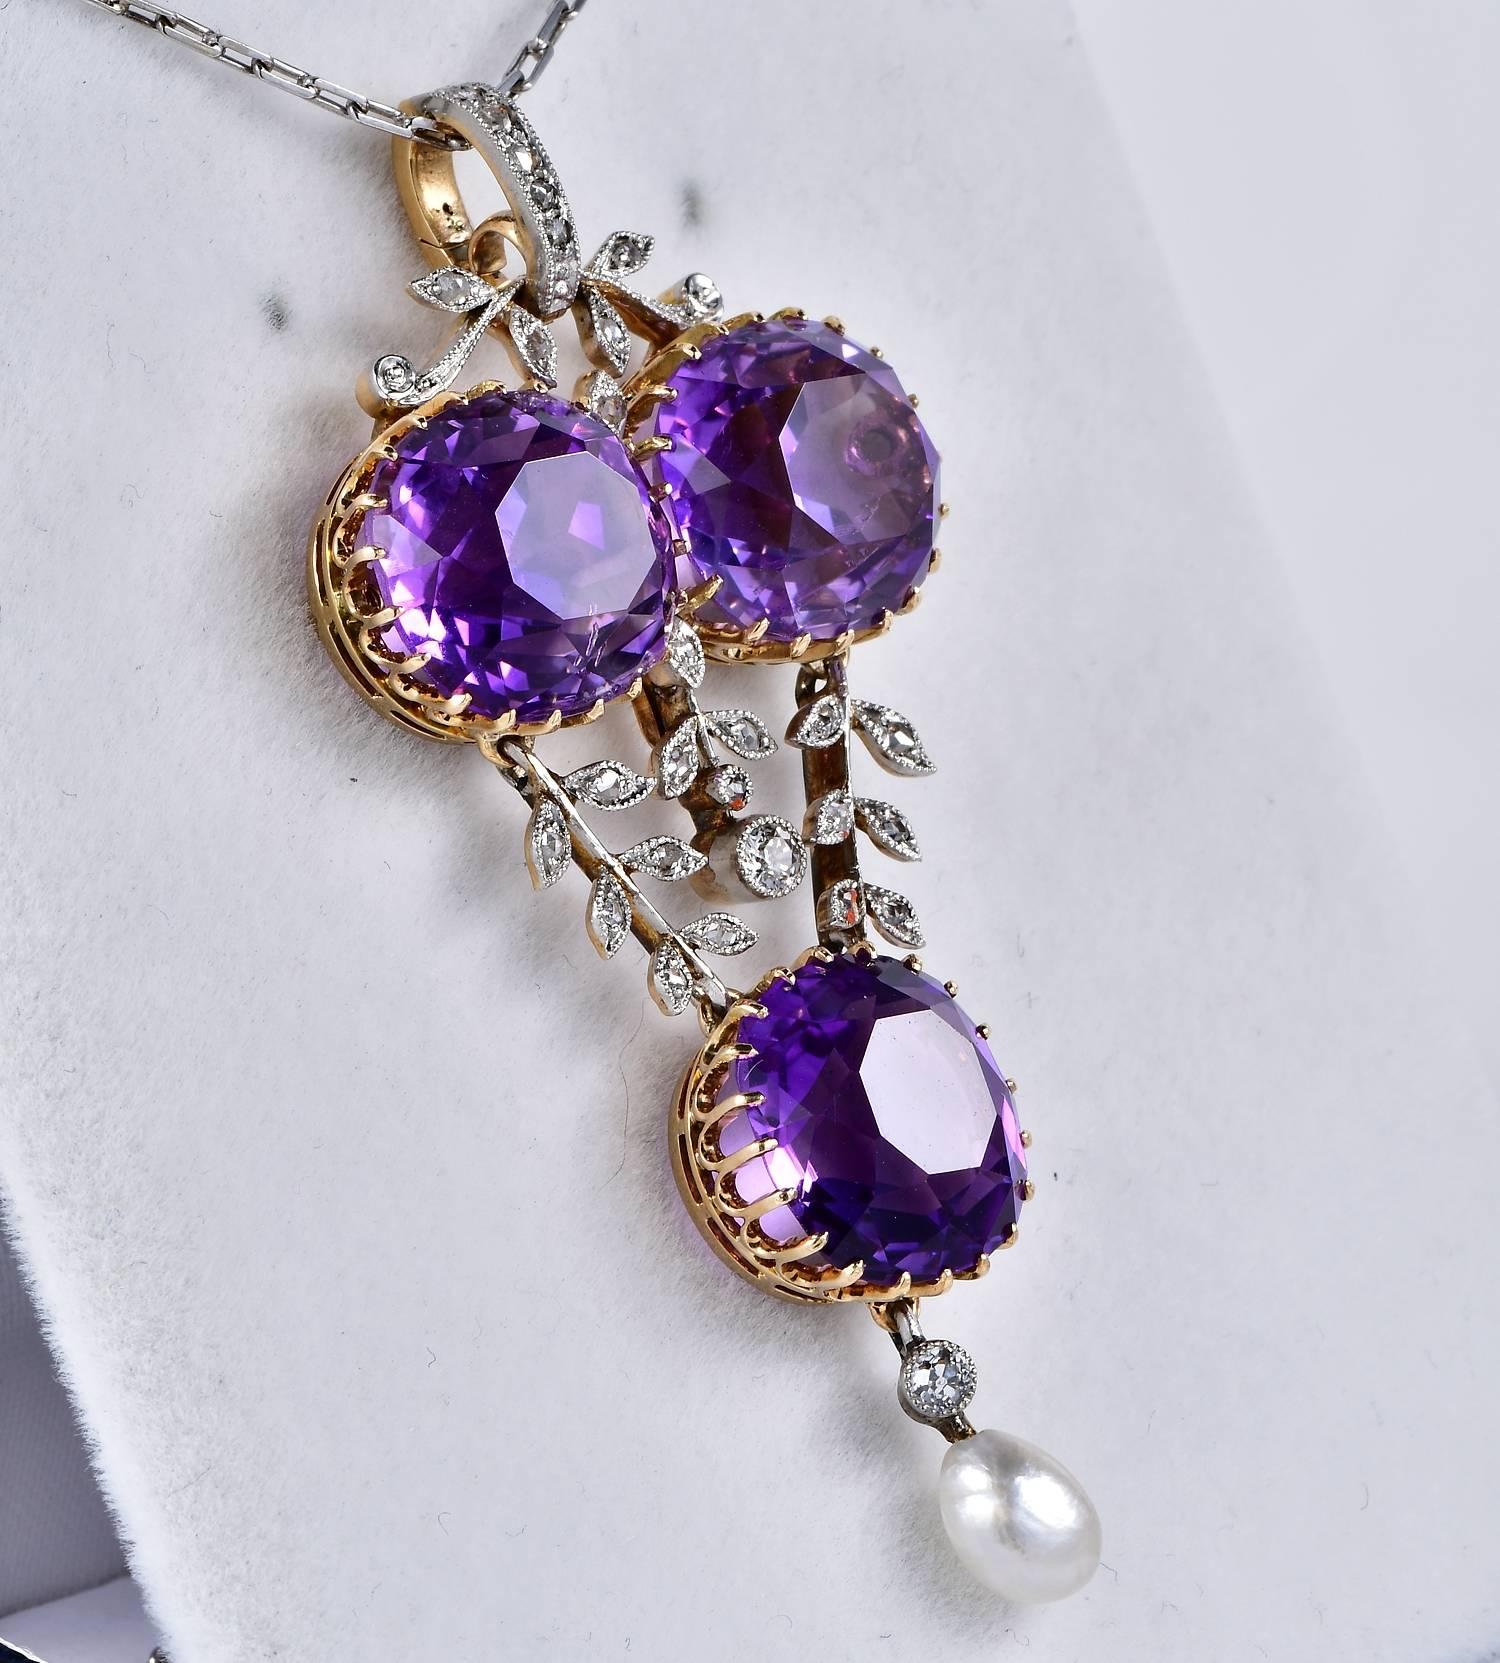 A striking authentic Edwardian natural Siberian Amethyst and Diamond pendant
Hand crafted of solid 18 Kt gold with platinum top. Three large and superb Siberian Amethysts make the focal point of this rare past workmanship. The three large Amethysts